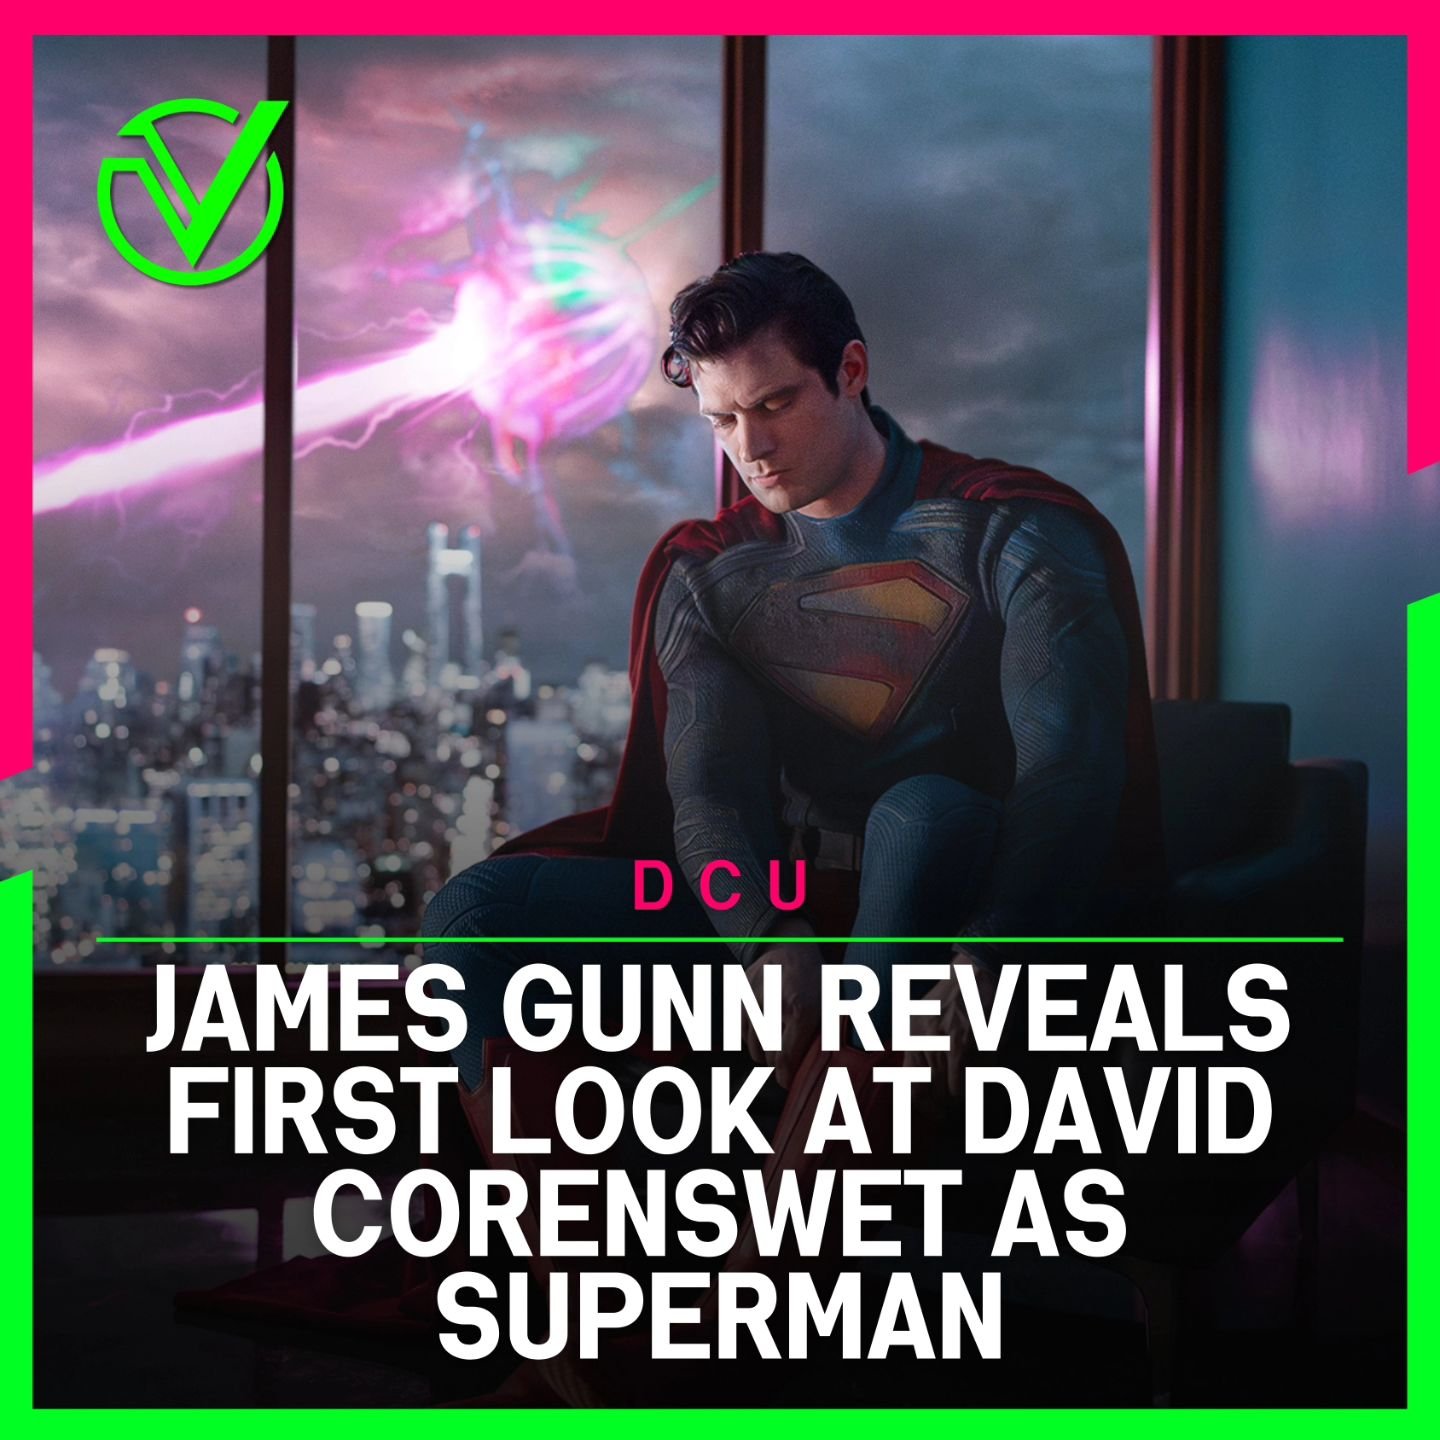 As a Superman fan, seeing David Corenswet in the iconic suit feels like unearthing an old treasure. It&rsquo;s nostalgia wrapped in red and blue.

🔴 The Red Trunks Return: Those crimson briefs, absent since Henry Cavill&rsquo;s era, are back! They r